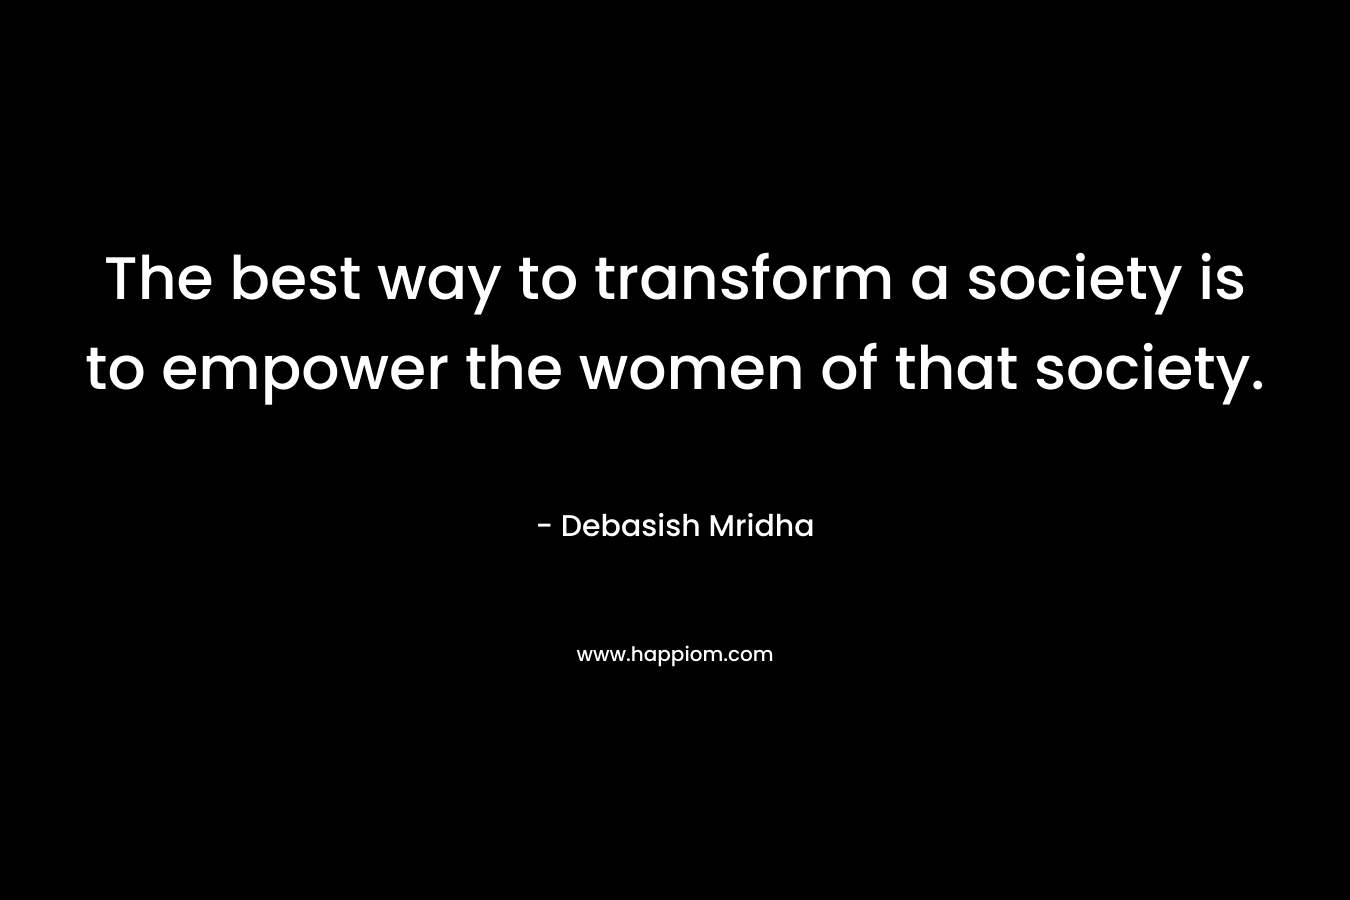 The best way to transform a society is to empower the women of that society.